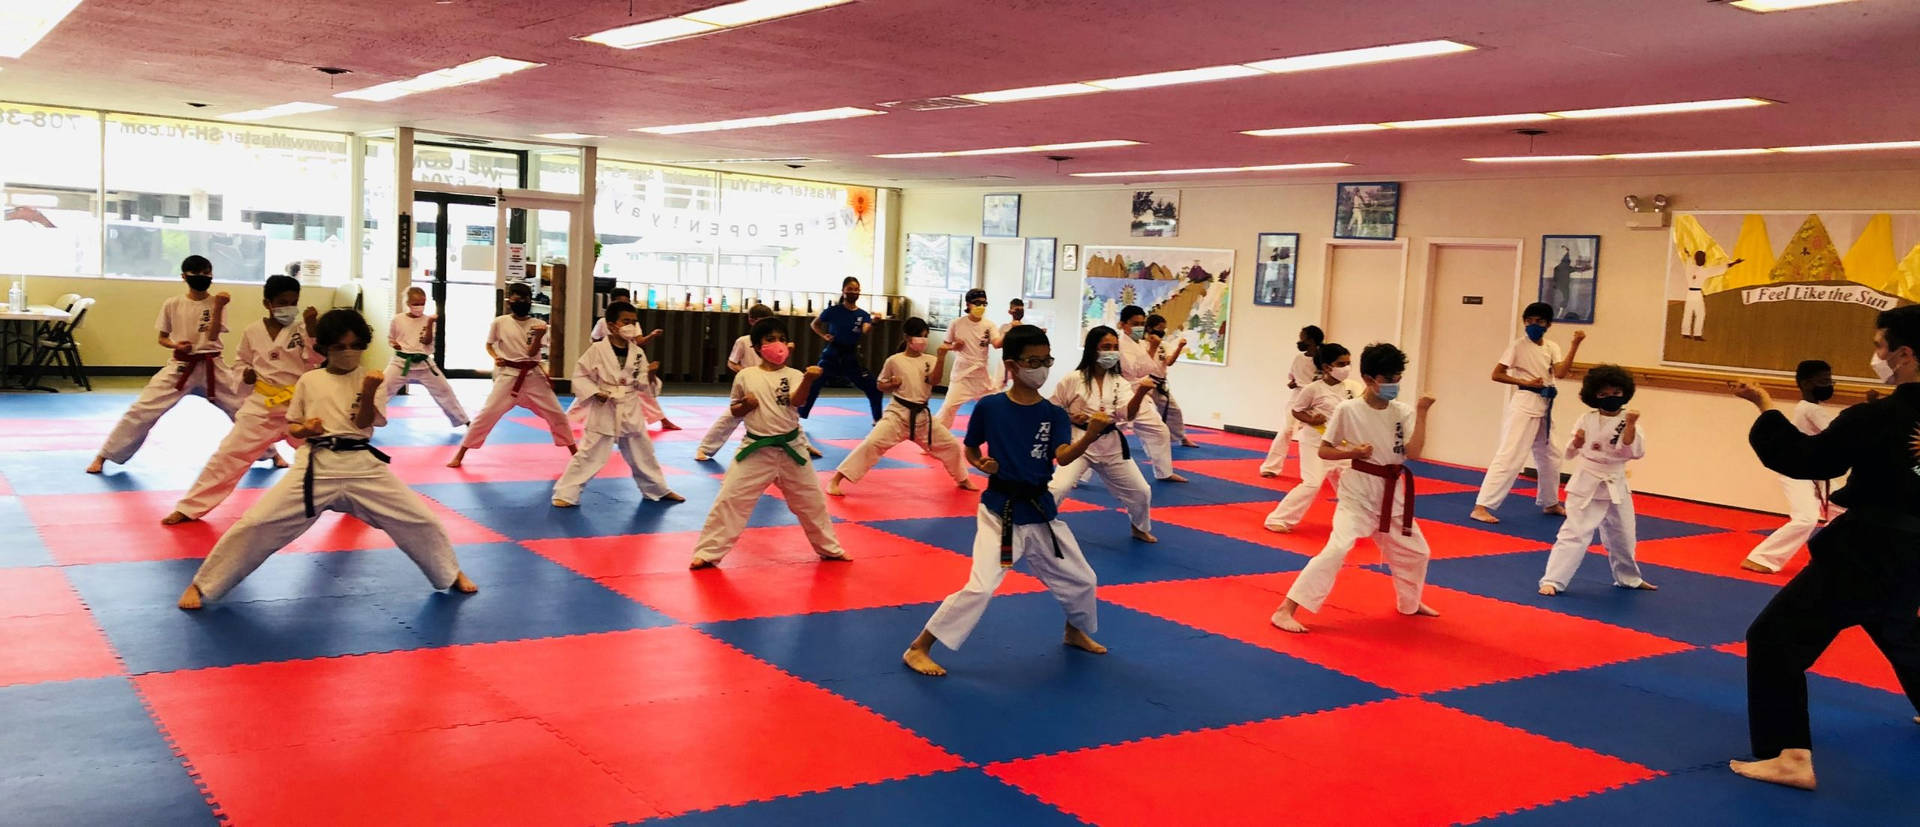 Caption: Diligent Young Karate Students Training in a Traditional Dojo Wallpaper